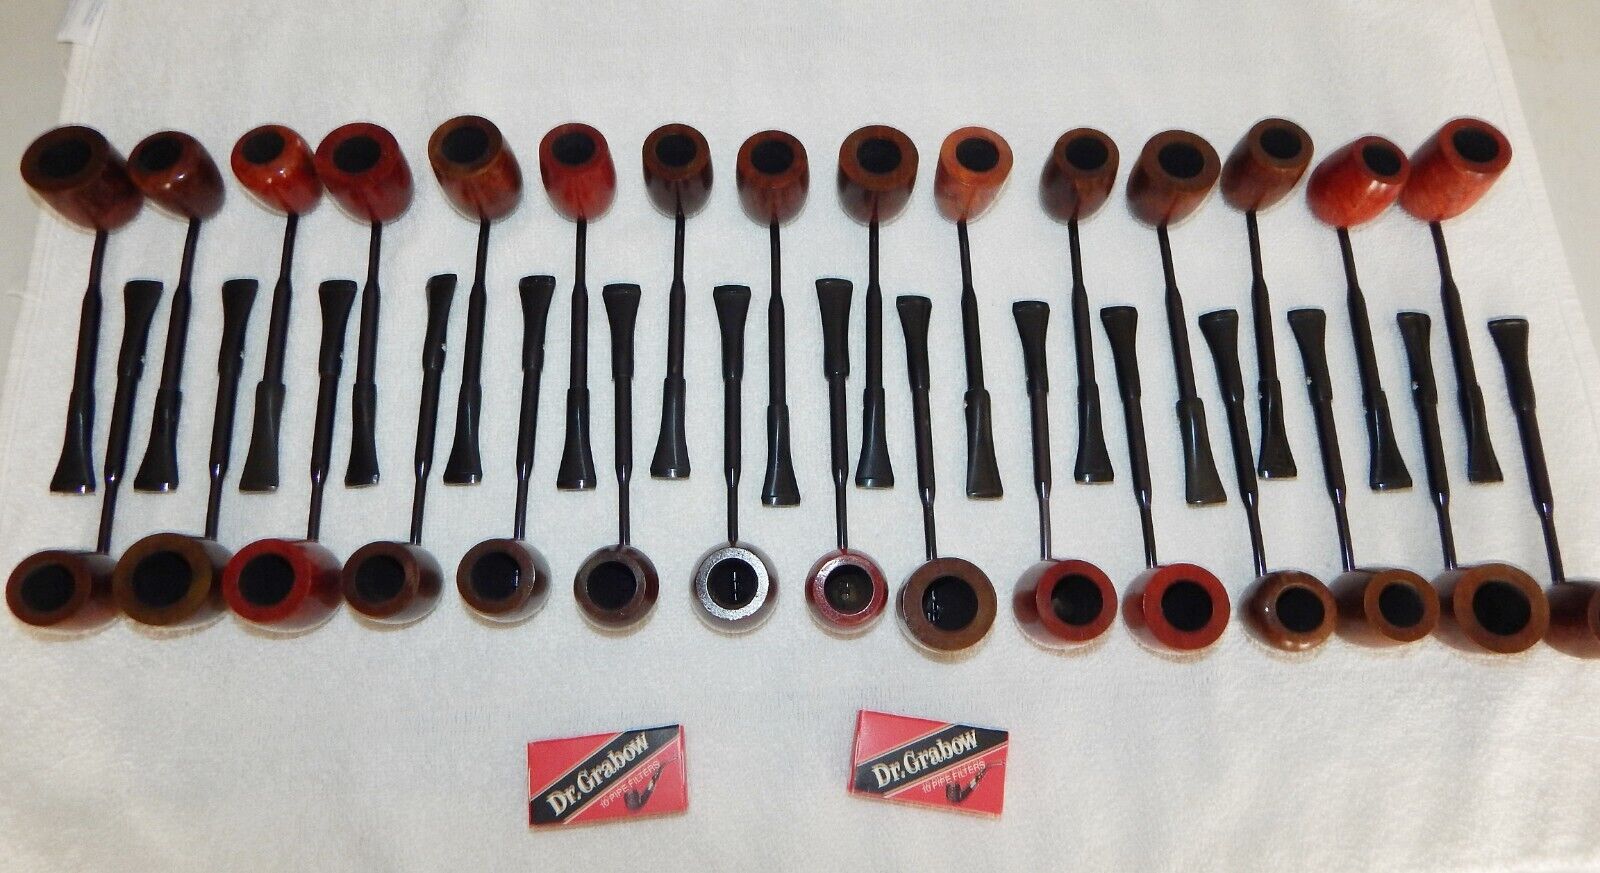 Rare Vintage Dr. GRABOW CDL USA Made Survivor Pipe Lot of 30 NEVER SMOKED